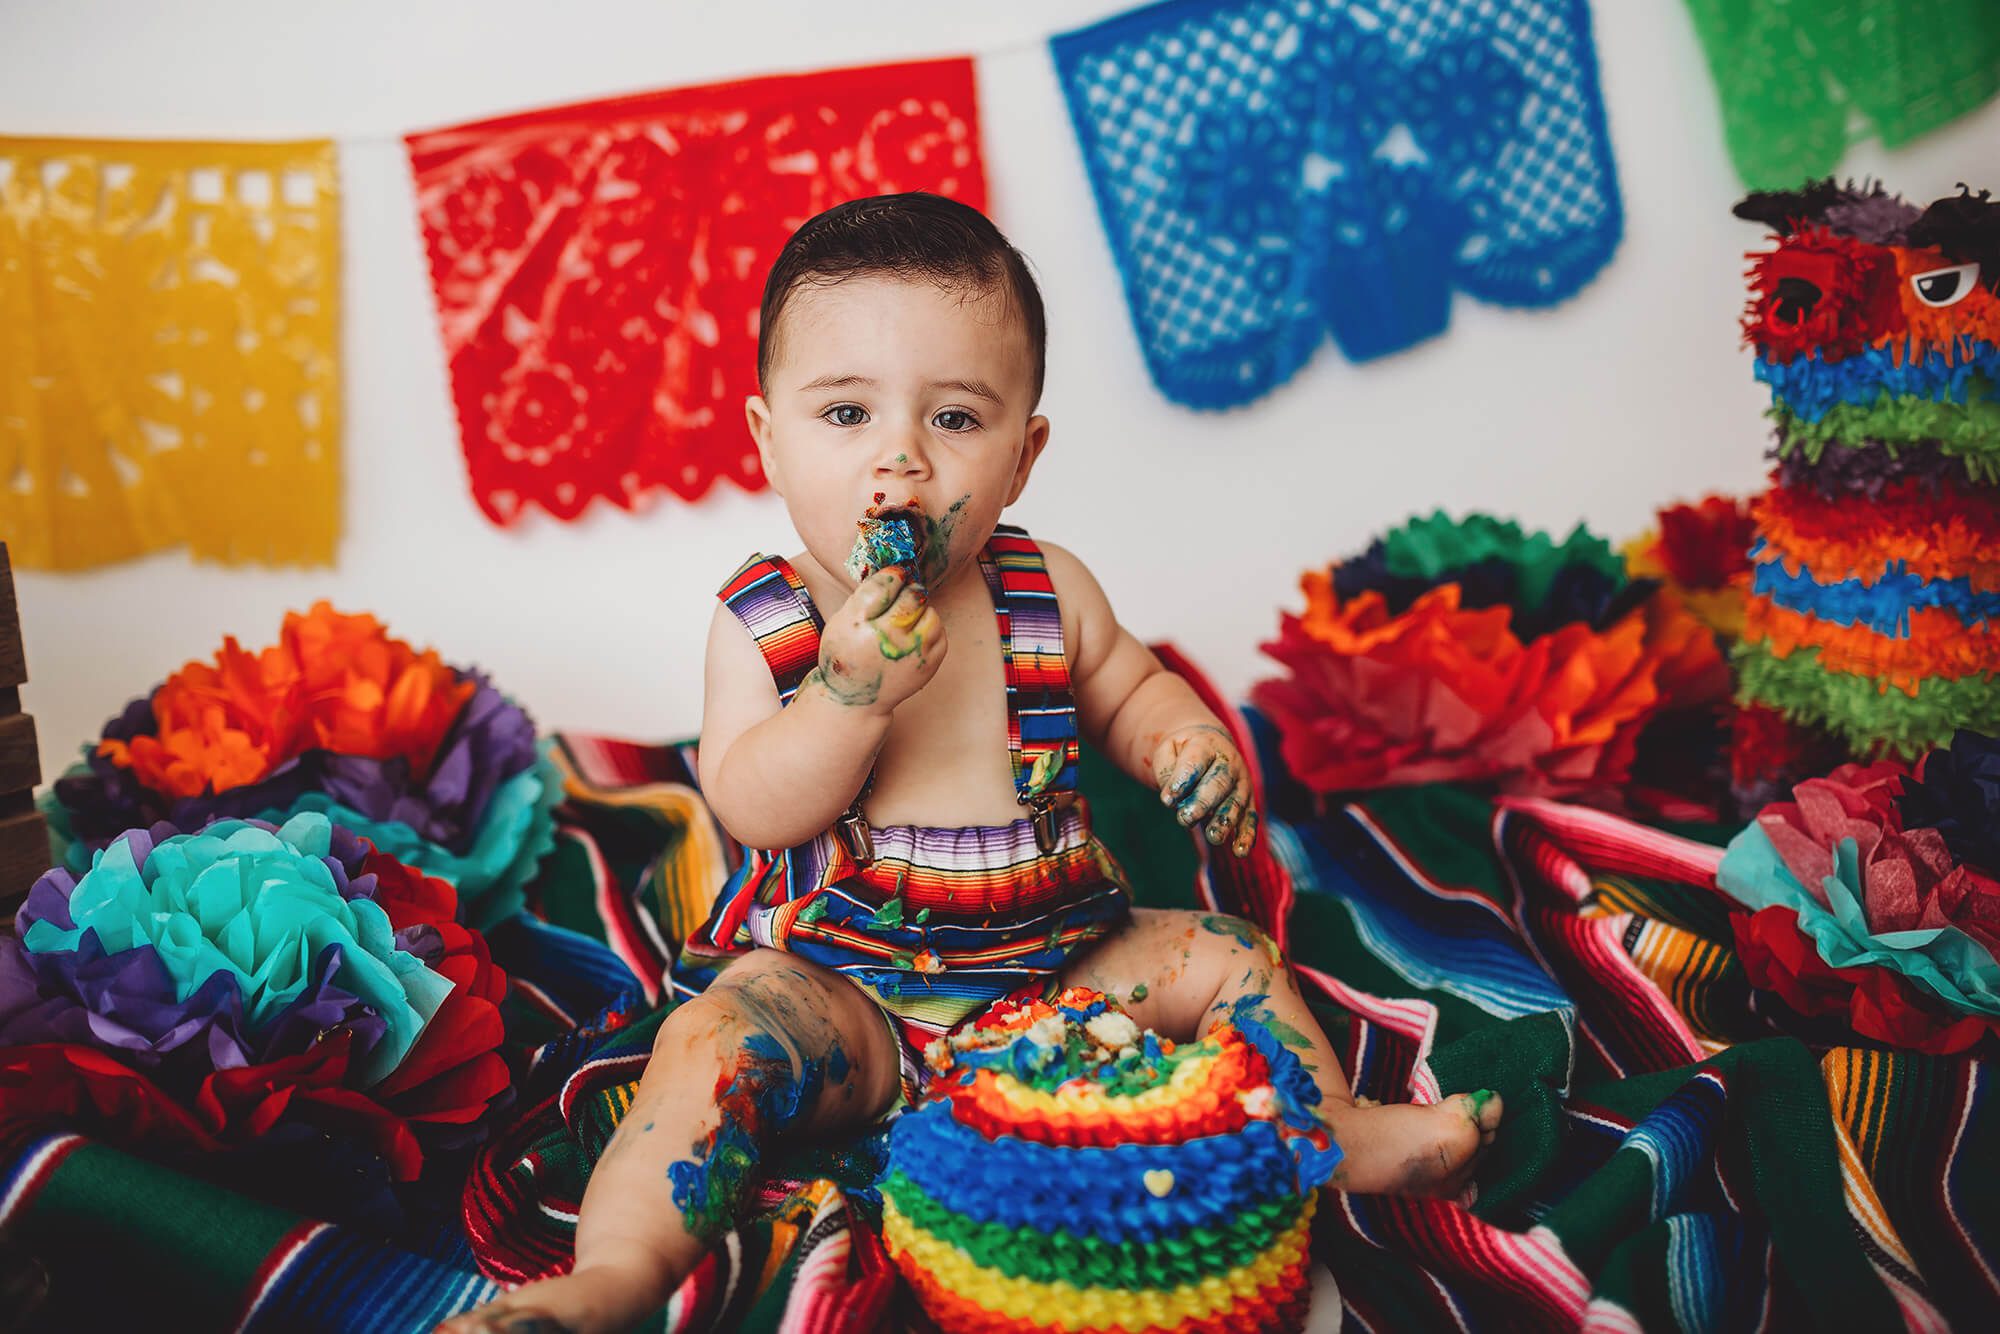 A Mexican-themed cake smash session from Belle Vie Photography in Tucson